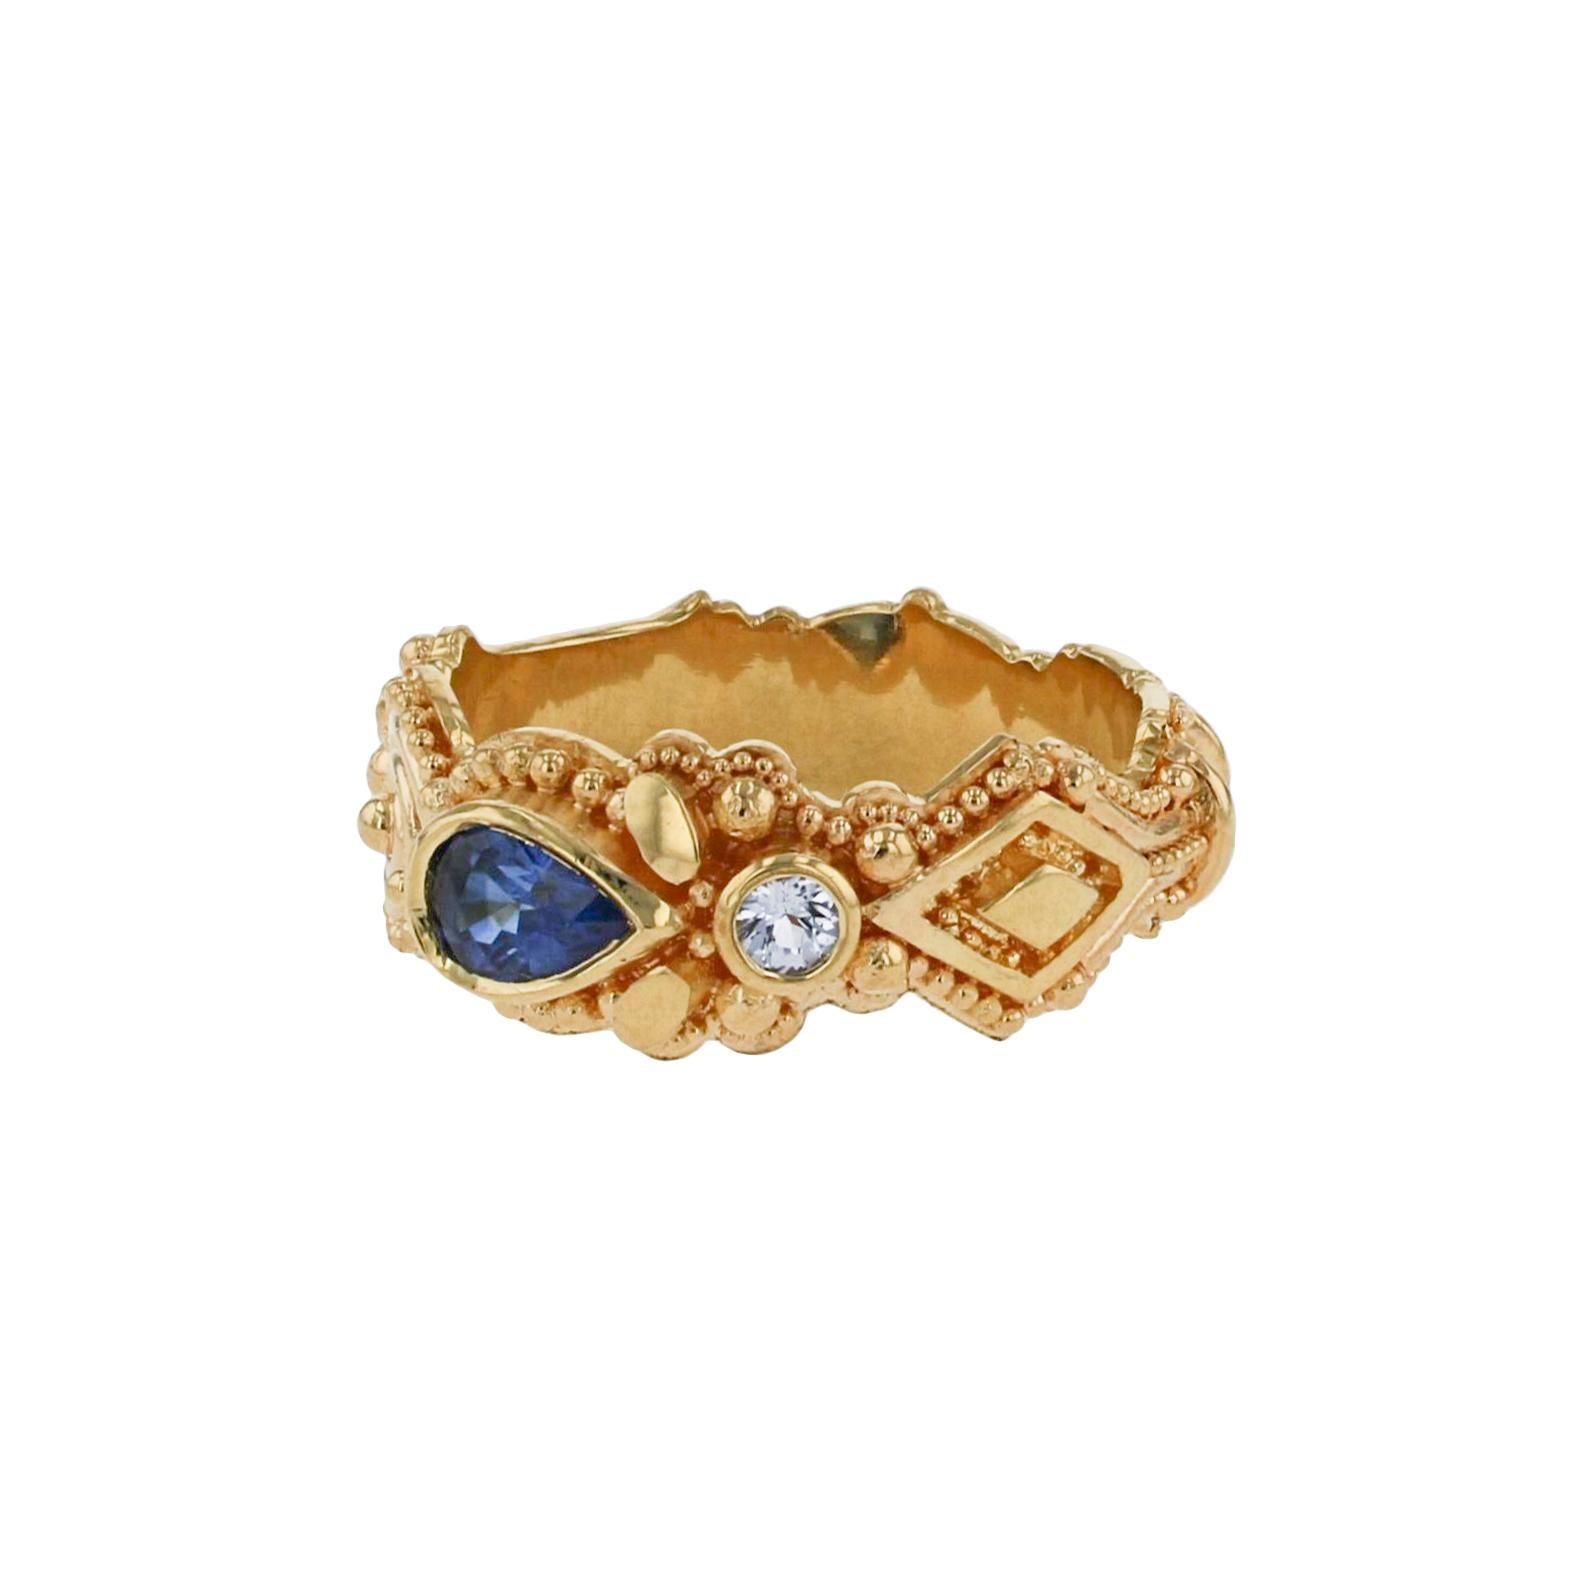 The joy of creation is seen in this new Kent Raible treasure of a ring! Artistry and fine craftsmanship come together, once again, under the command of Raible's unique talent! 
This is a whimsical creation for sure, the artist has called this his